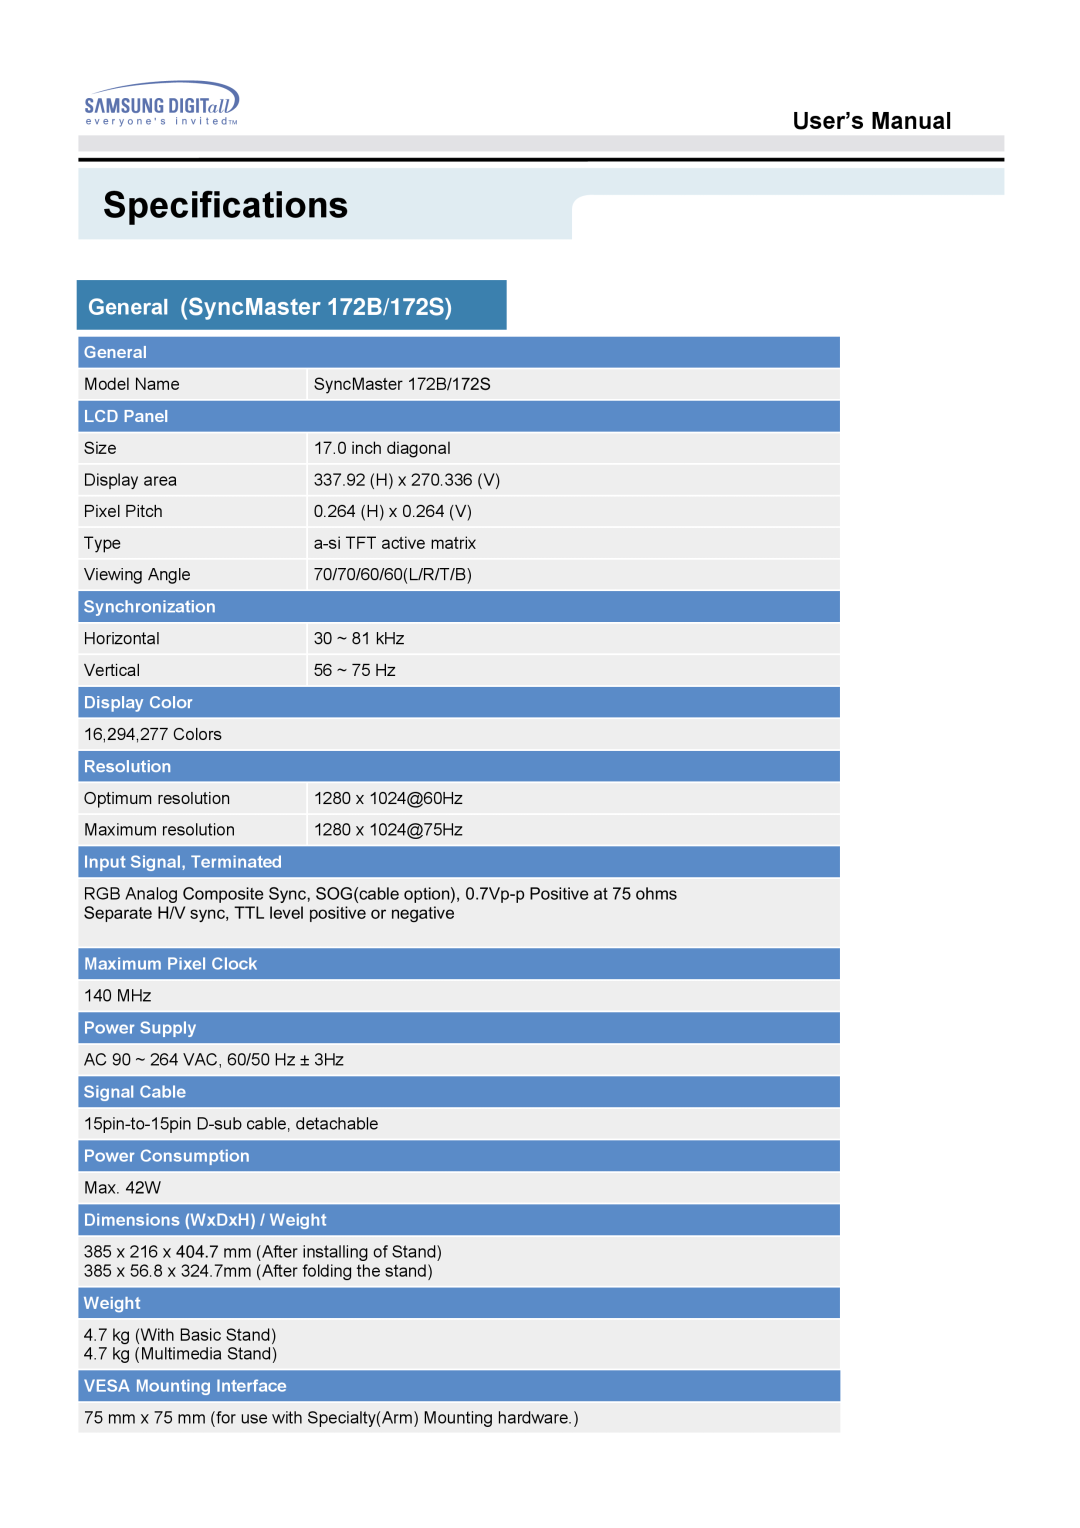 Samsung manual Specifications, General SyncMaster 172B/172S, User’s Manual 